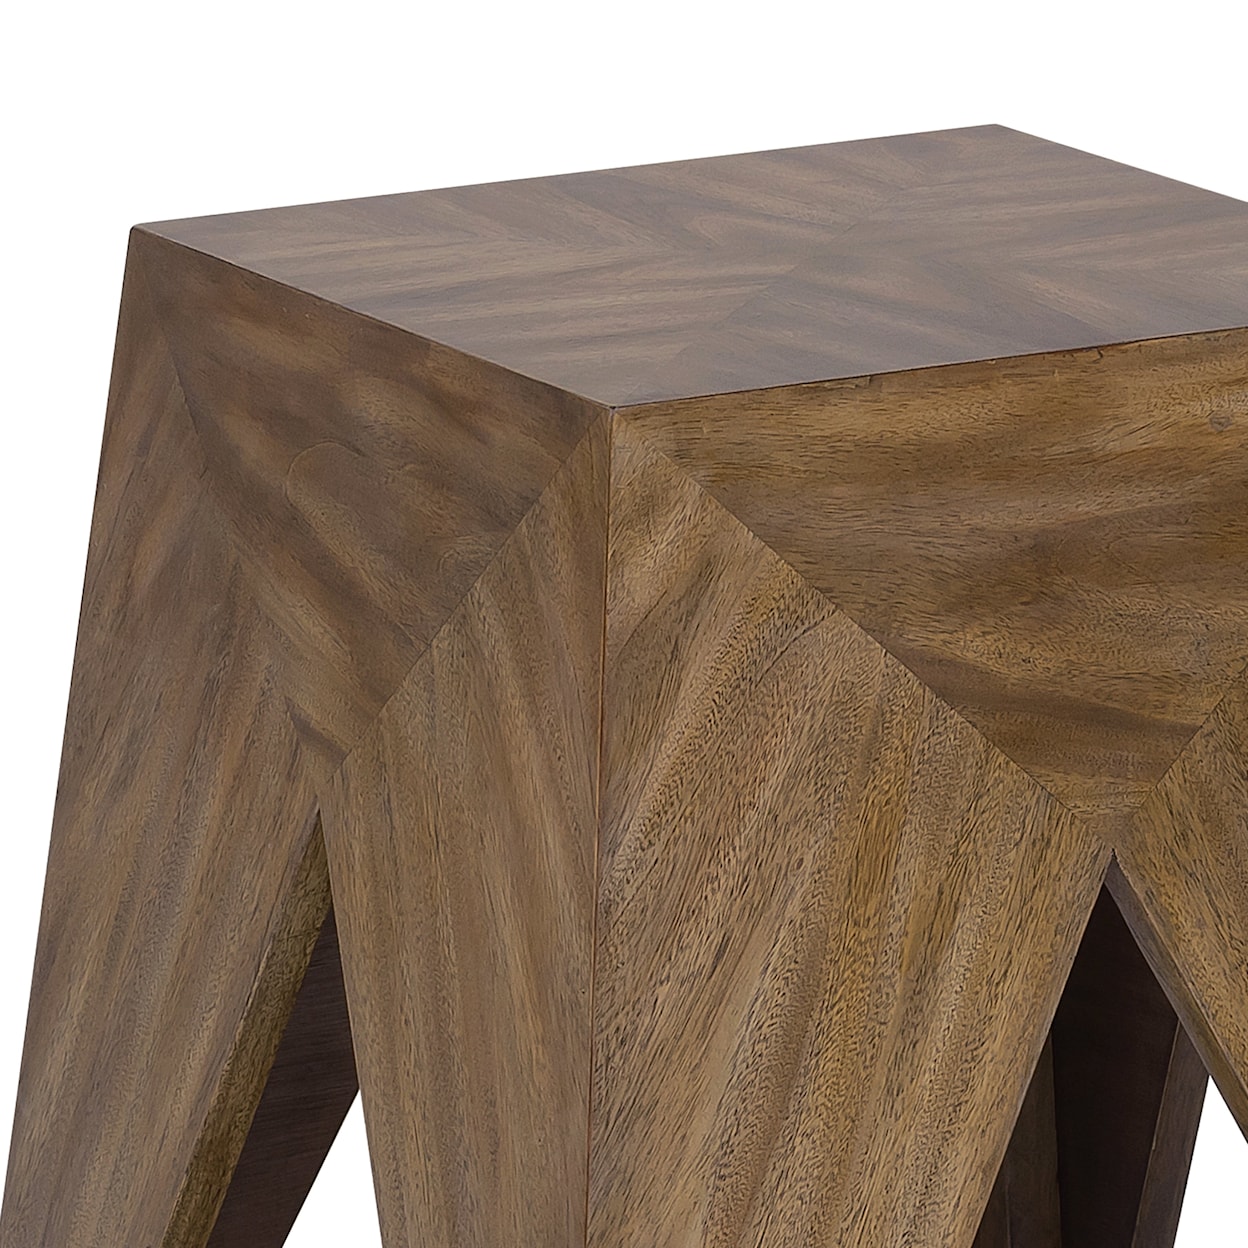 Pulaski Furniture Accents July 2021 Accent Table